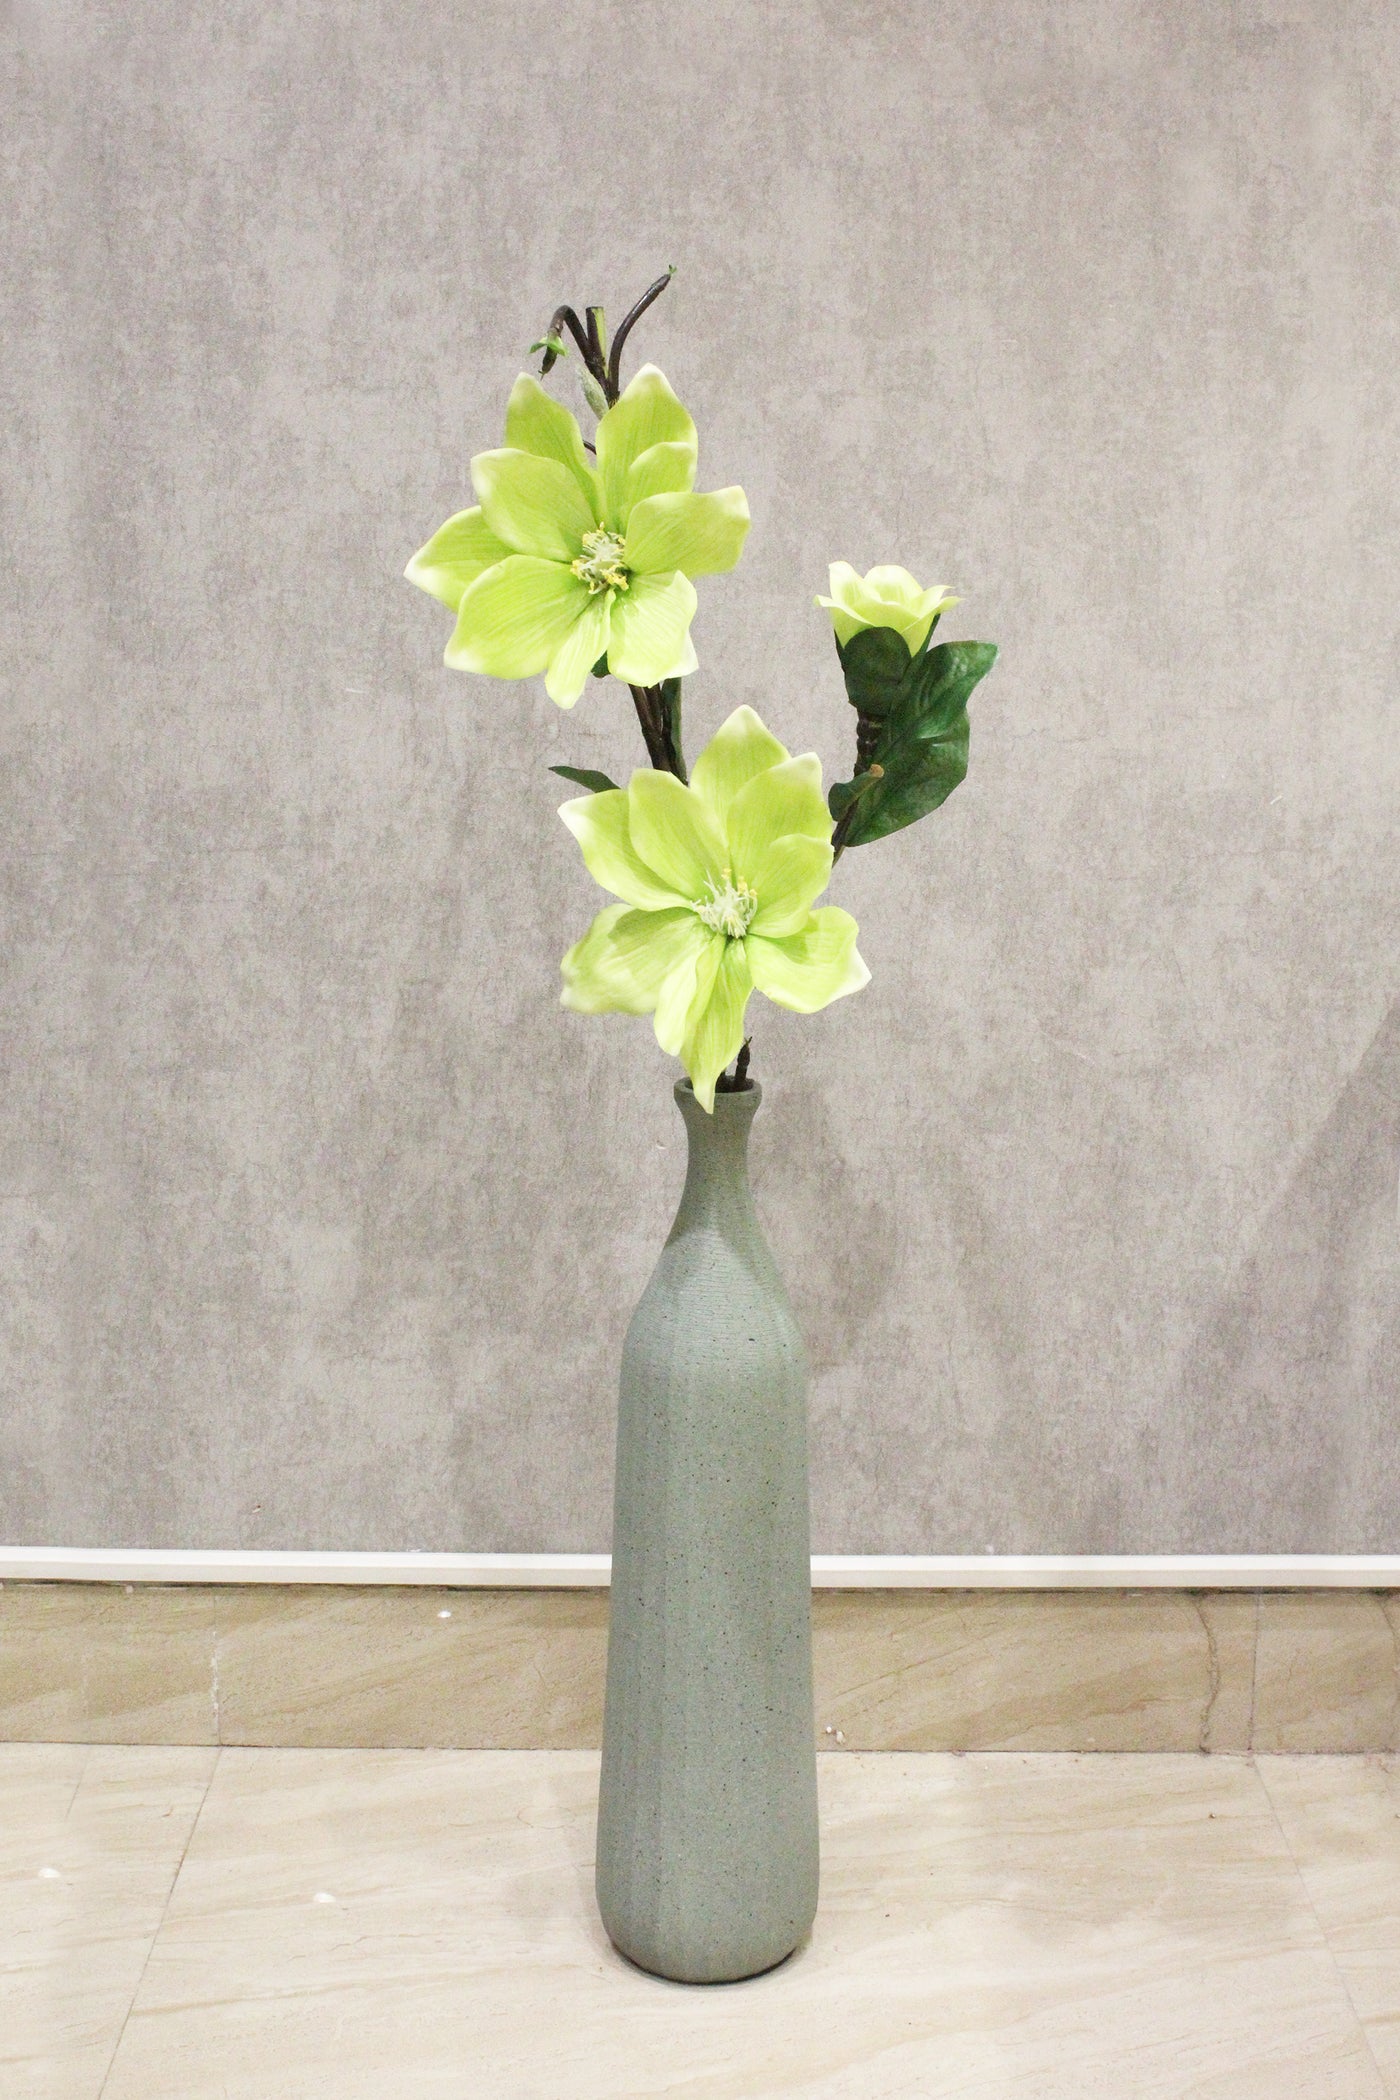 Magnolia Artificial Flower for your Home or Office Decor